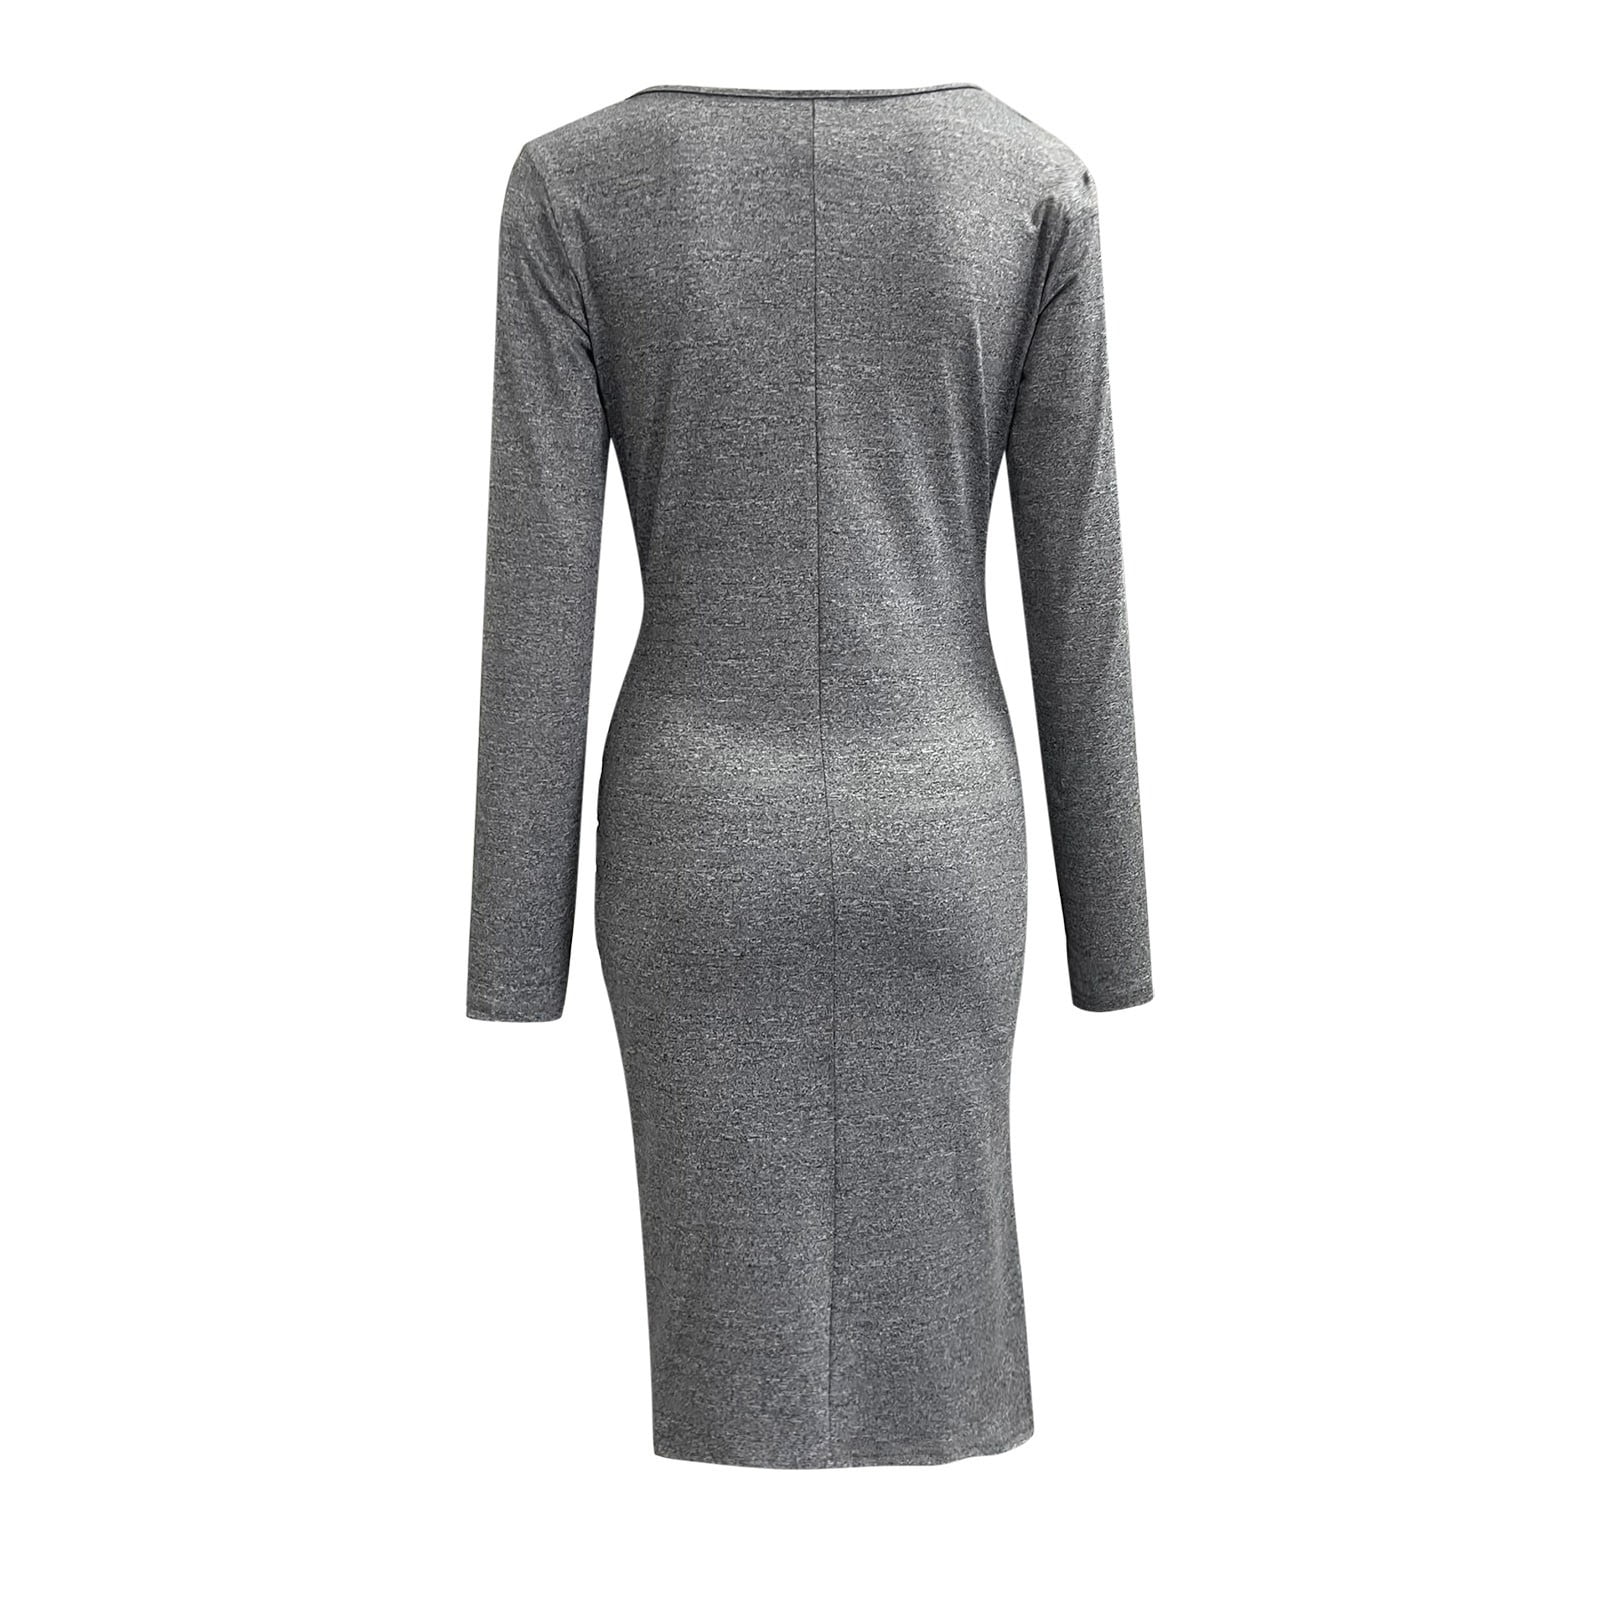 grey color dress for women